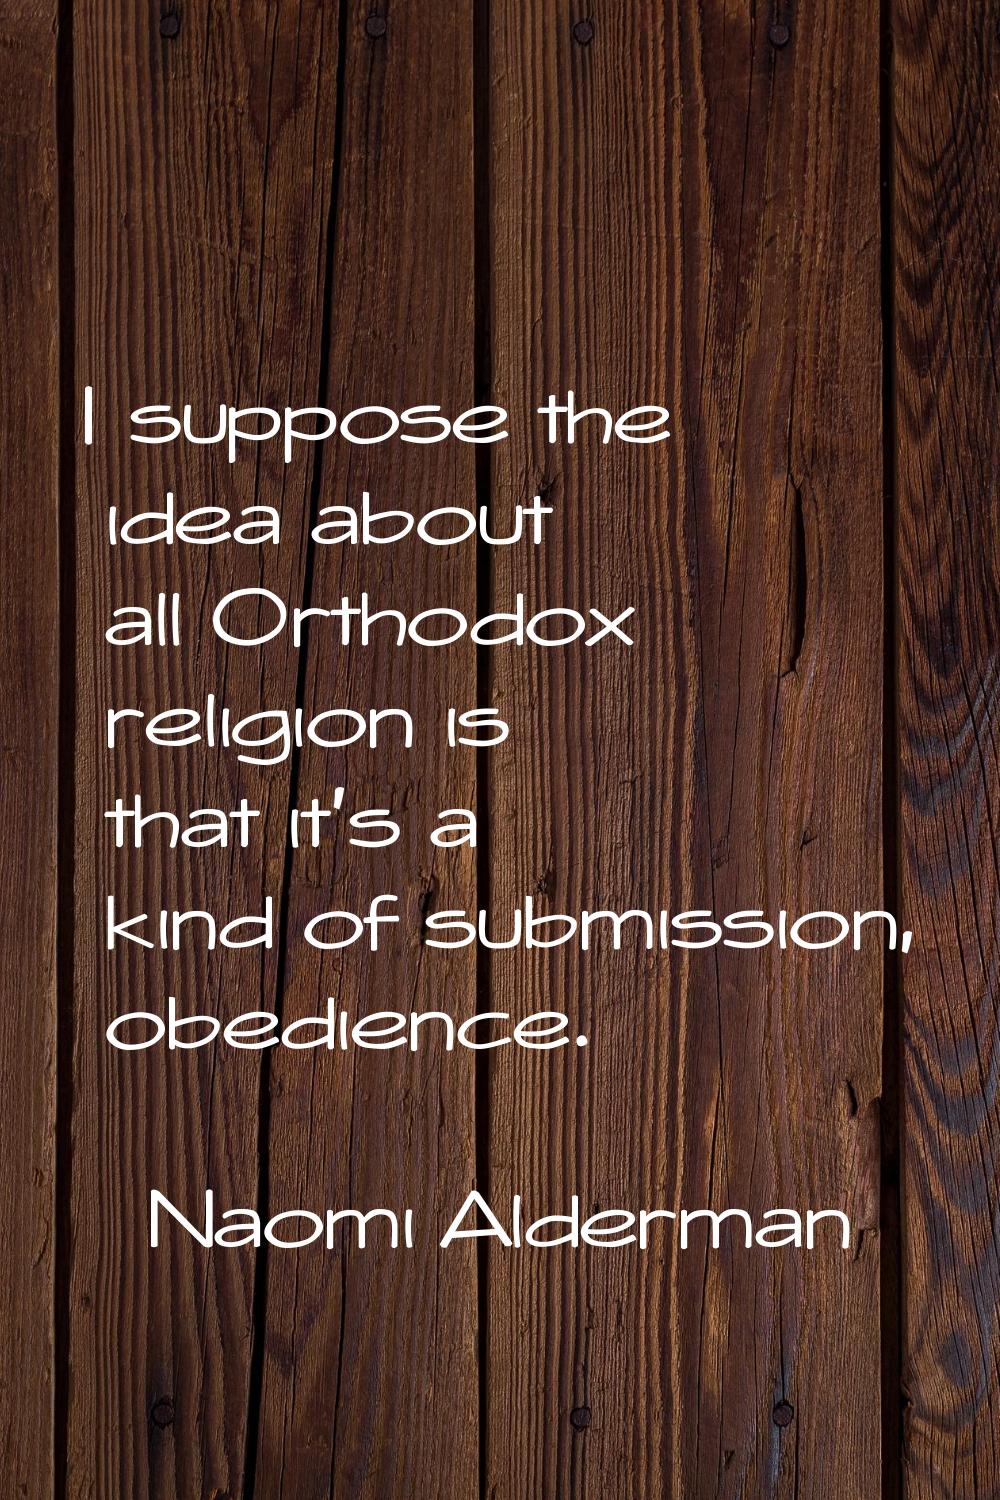 I suppose the idea about all Orthodox religion is that it's a kind of submission, obedience.